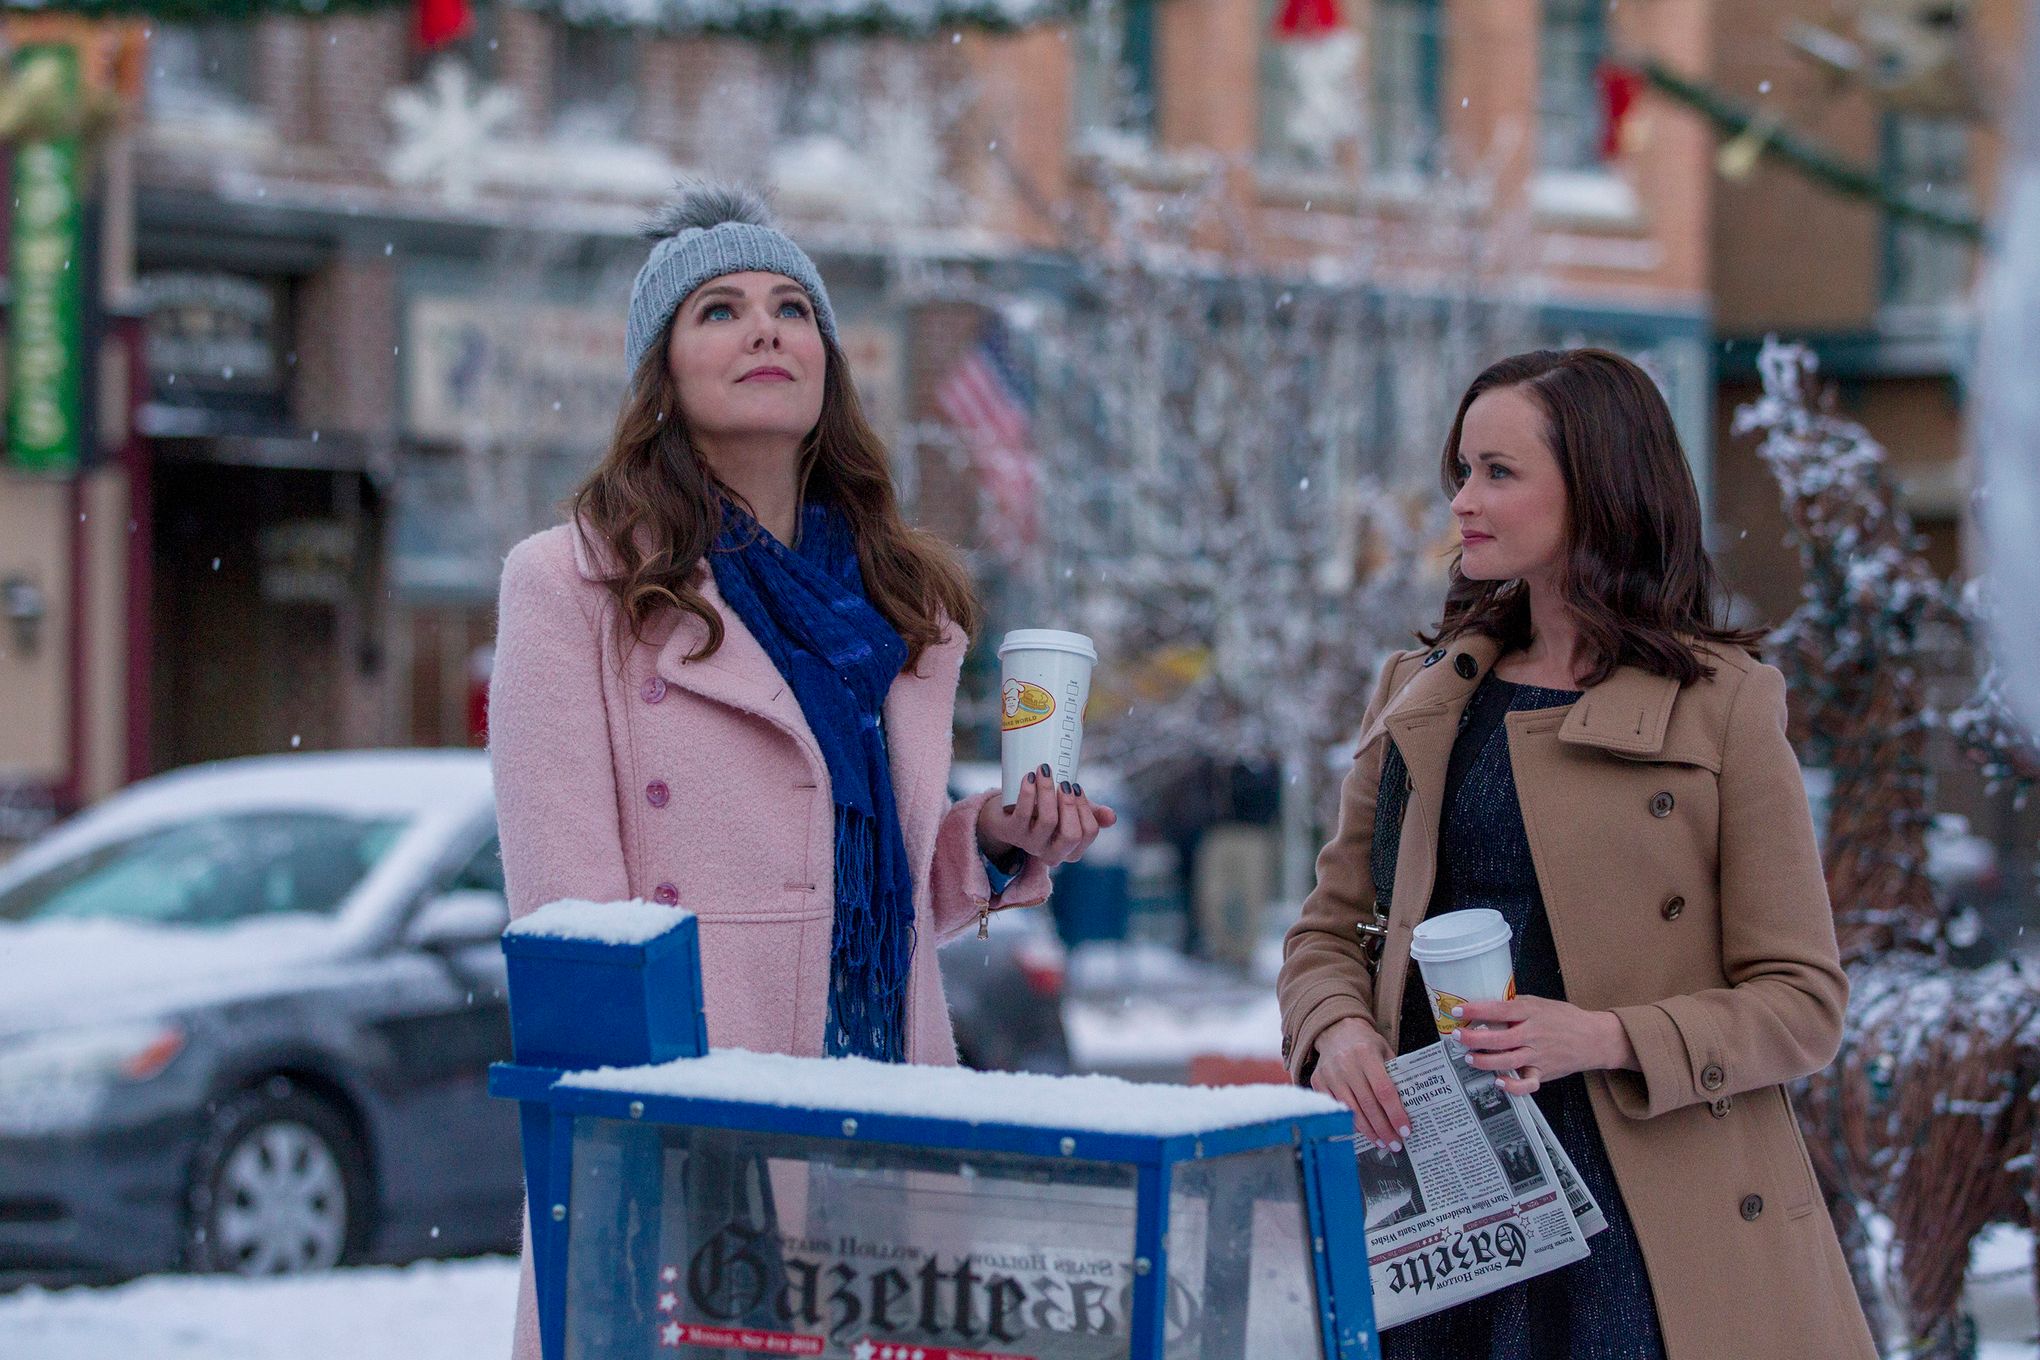 Review: 'Gilmore Girls' makes leap to Netflix with warmth, wit intact